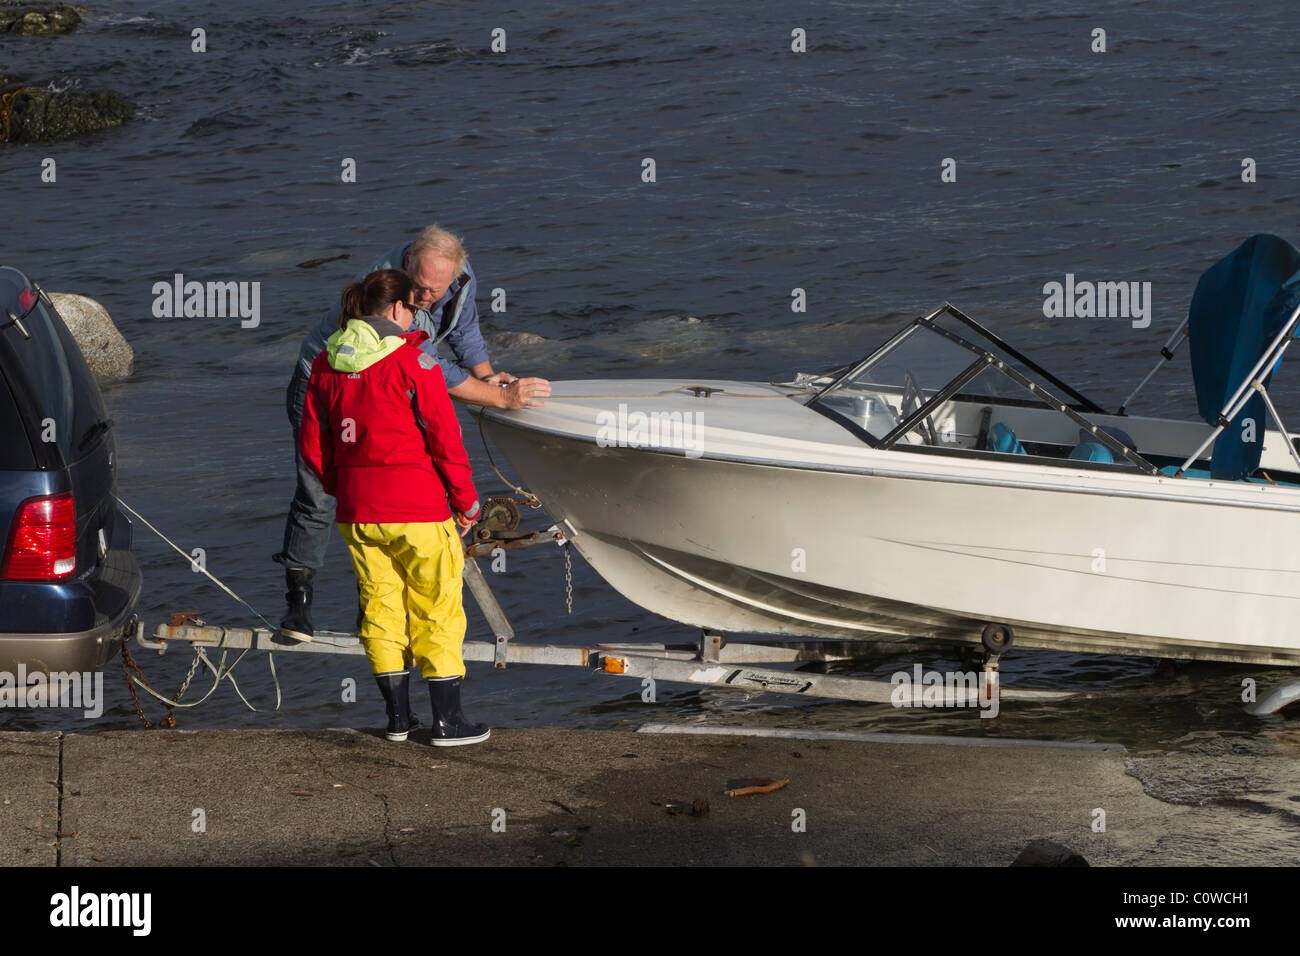 Launch and retrieval of a boat at a public launch ramp in Victoria, British Columbia, Canada Stock Photo